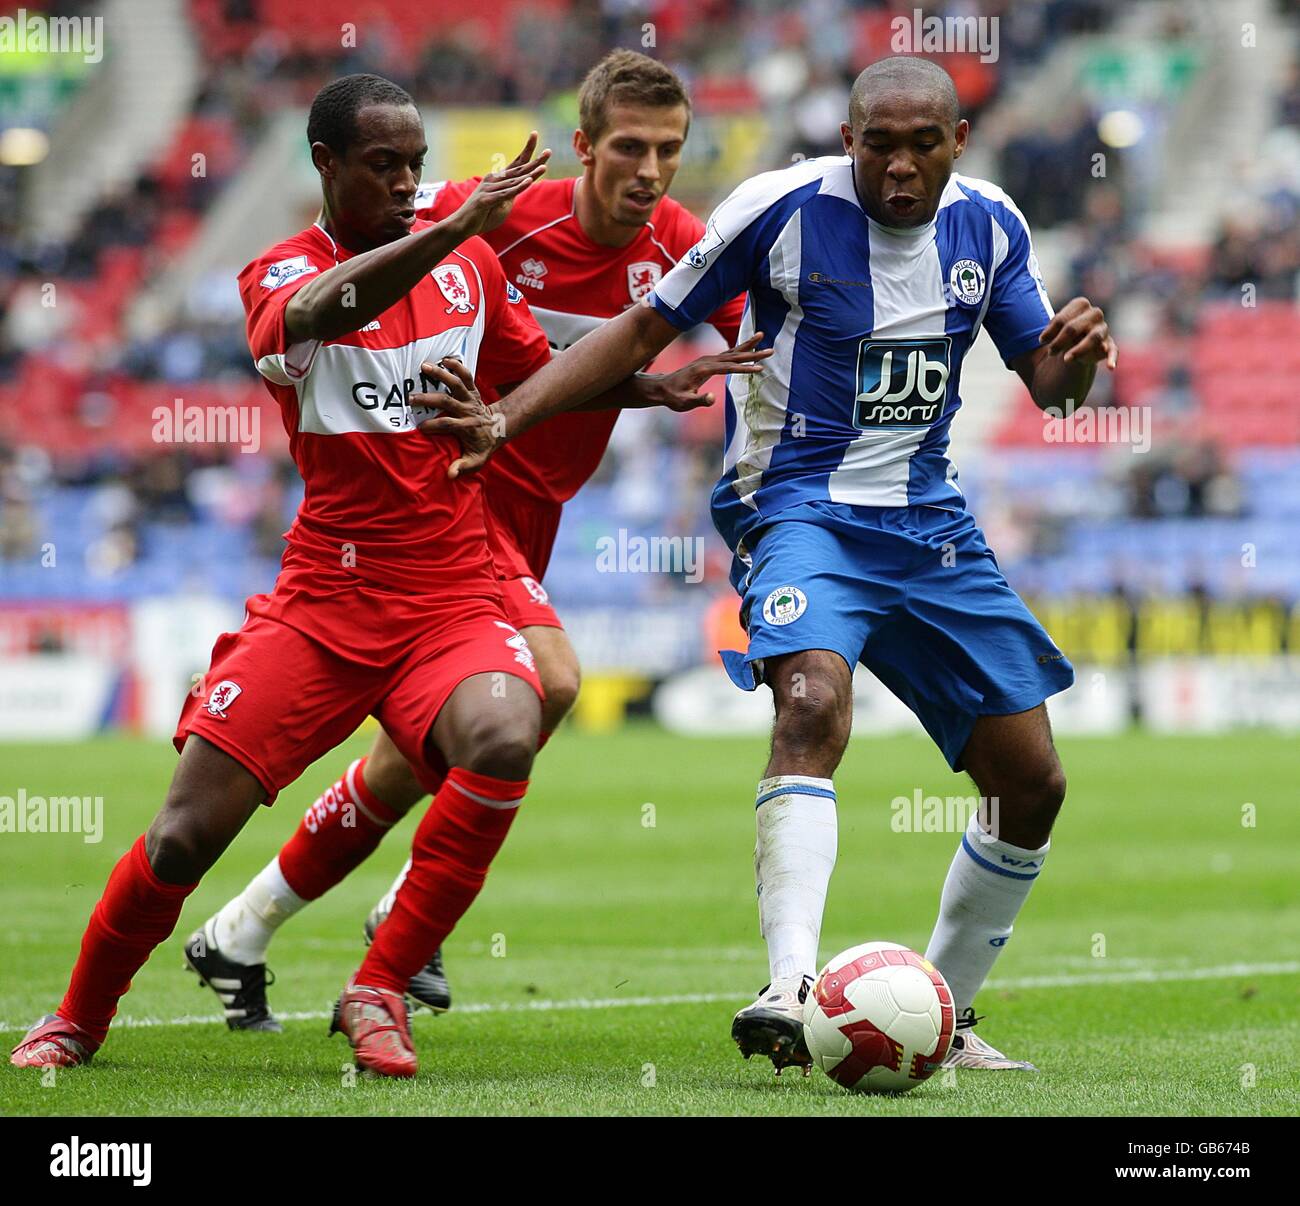 Soccer - Barclays Premier League - Wigan Athletic v Middlesbrough - JJB Stadium. Middlesbrough's Justin Hoyte (left) and Wigan Athletic's Wilson Palacios battle for the ball. Stock Photo